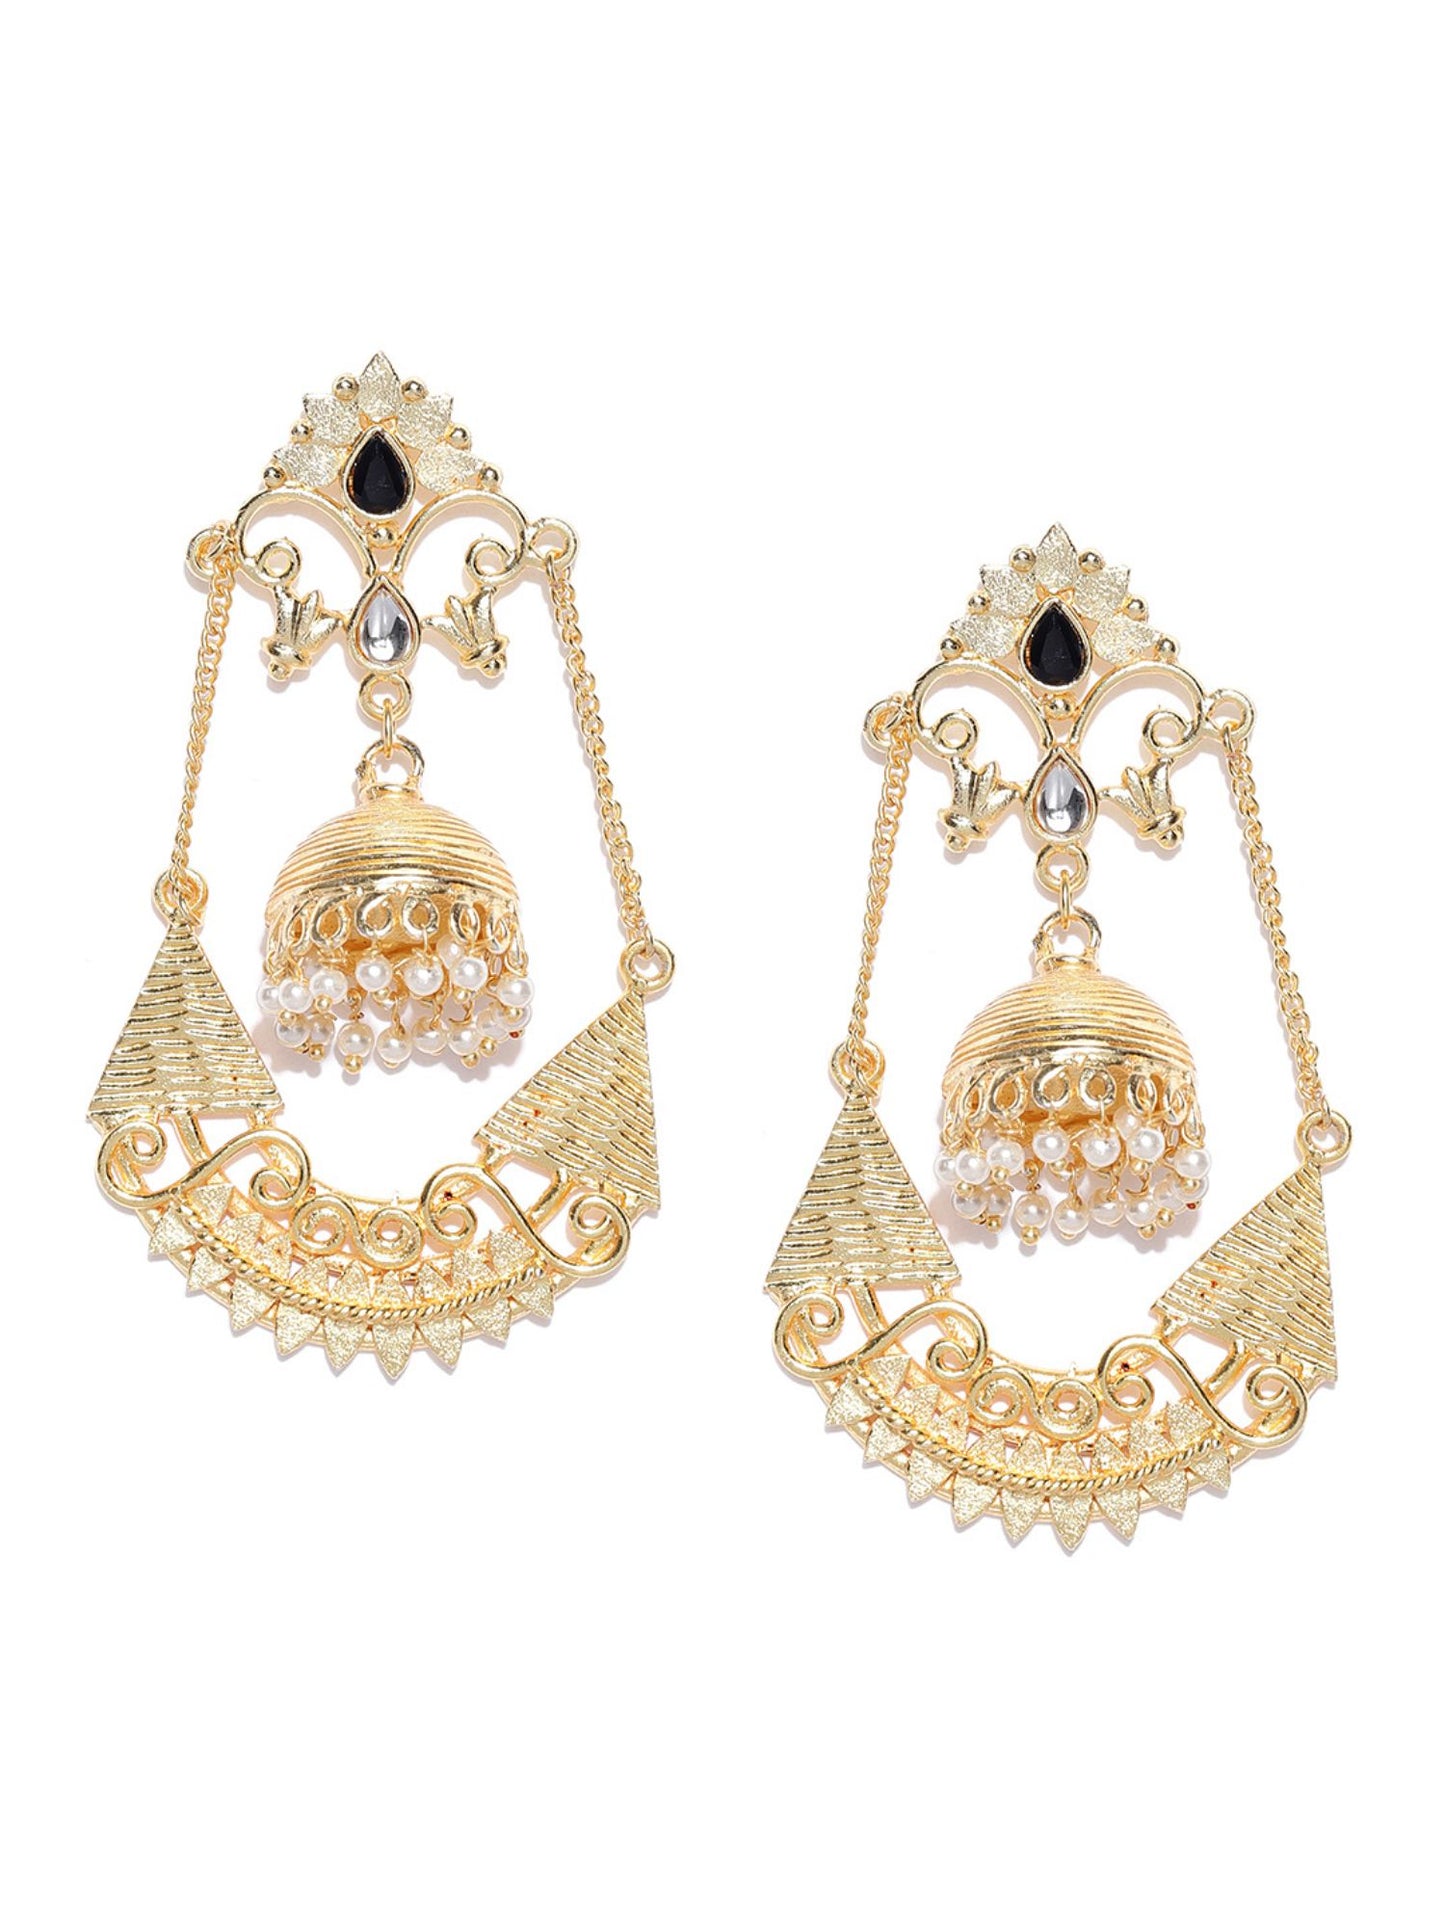 Blueberry gold dome drop earring studded mini stone